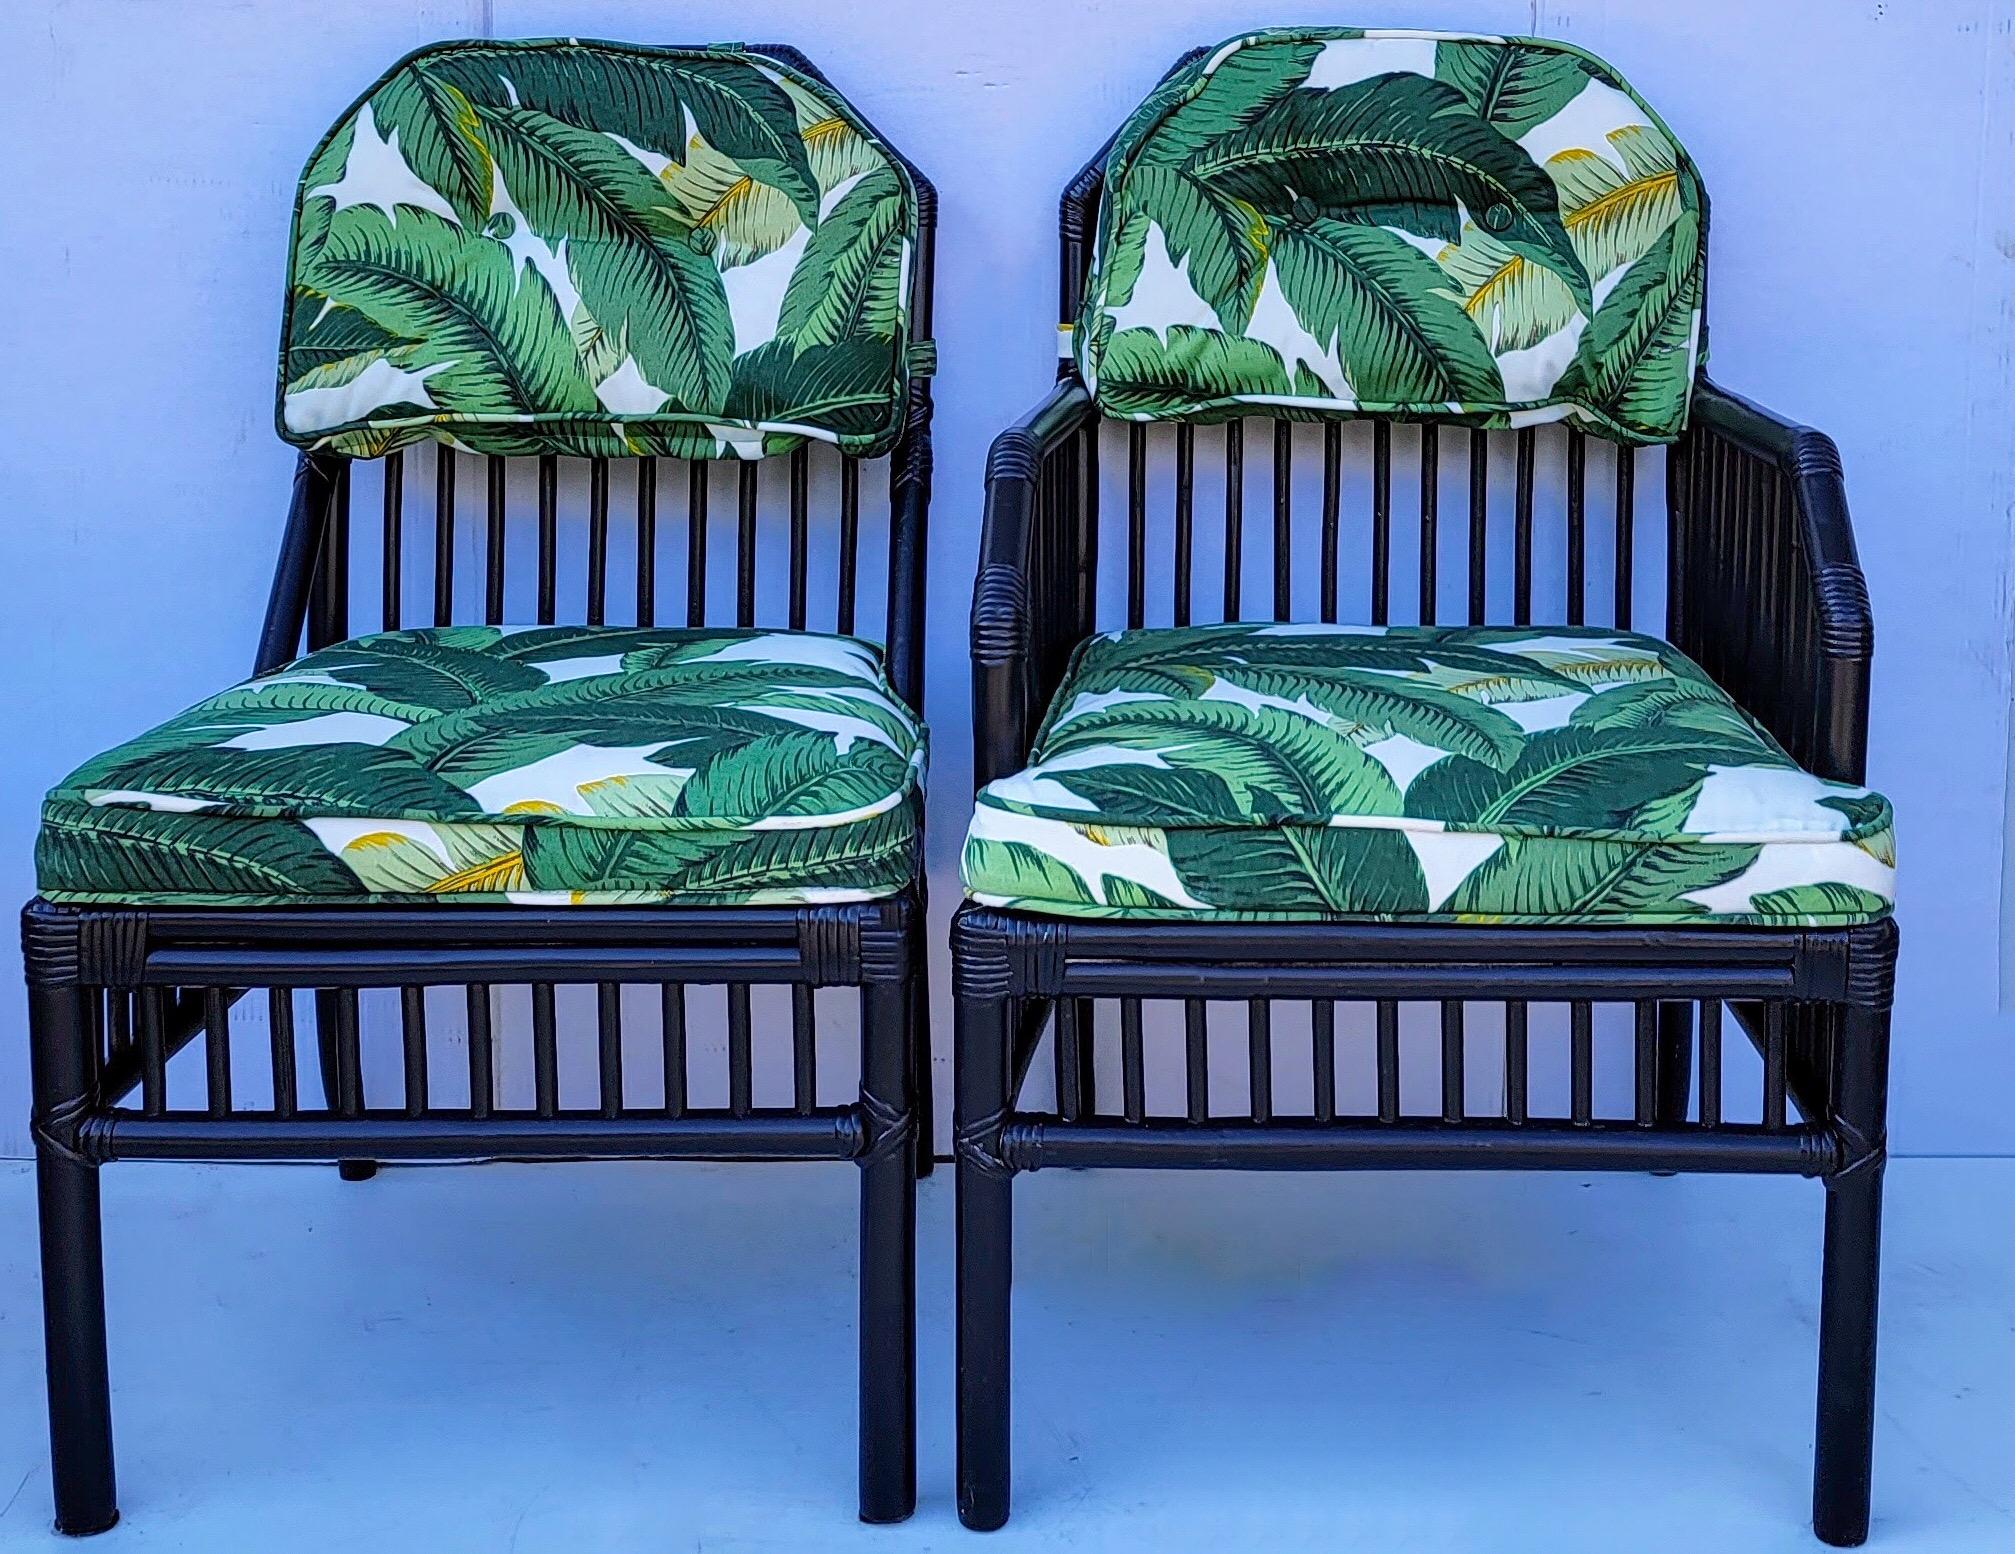 American Black Ficks Reed Rattan Dining Chairs in Tropical Banana Leaf Fabric, Set of 6